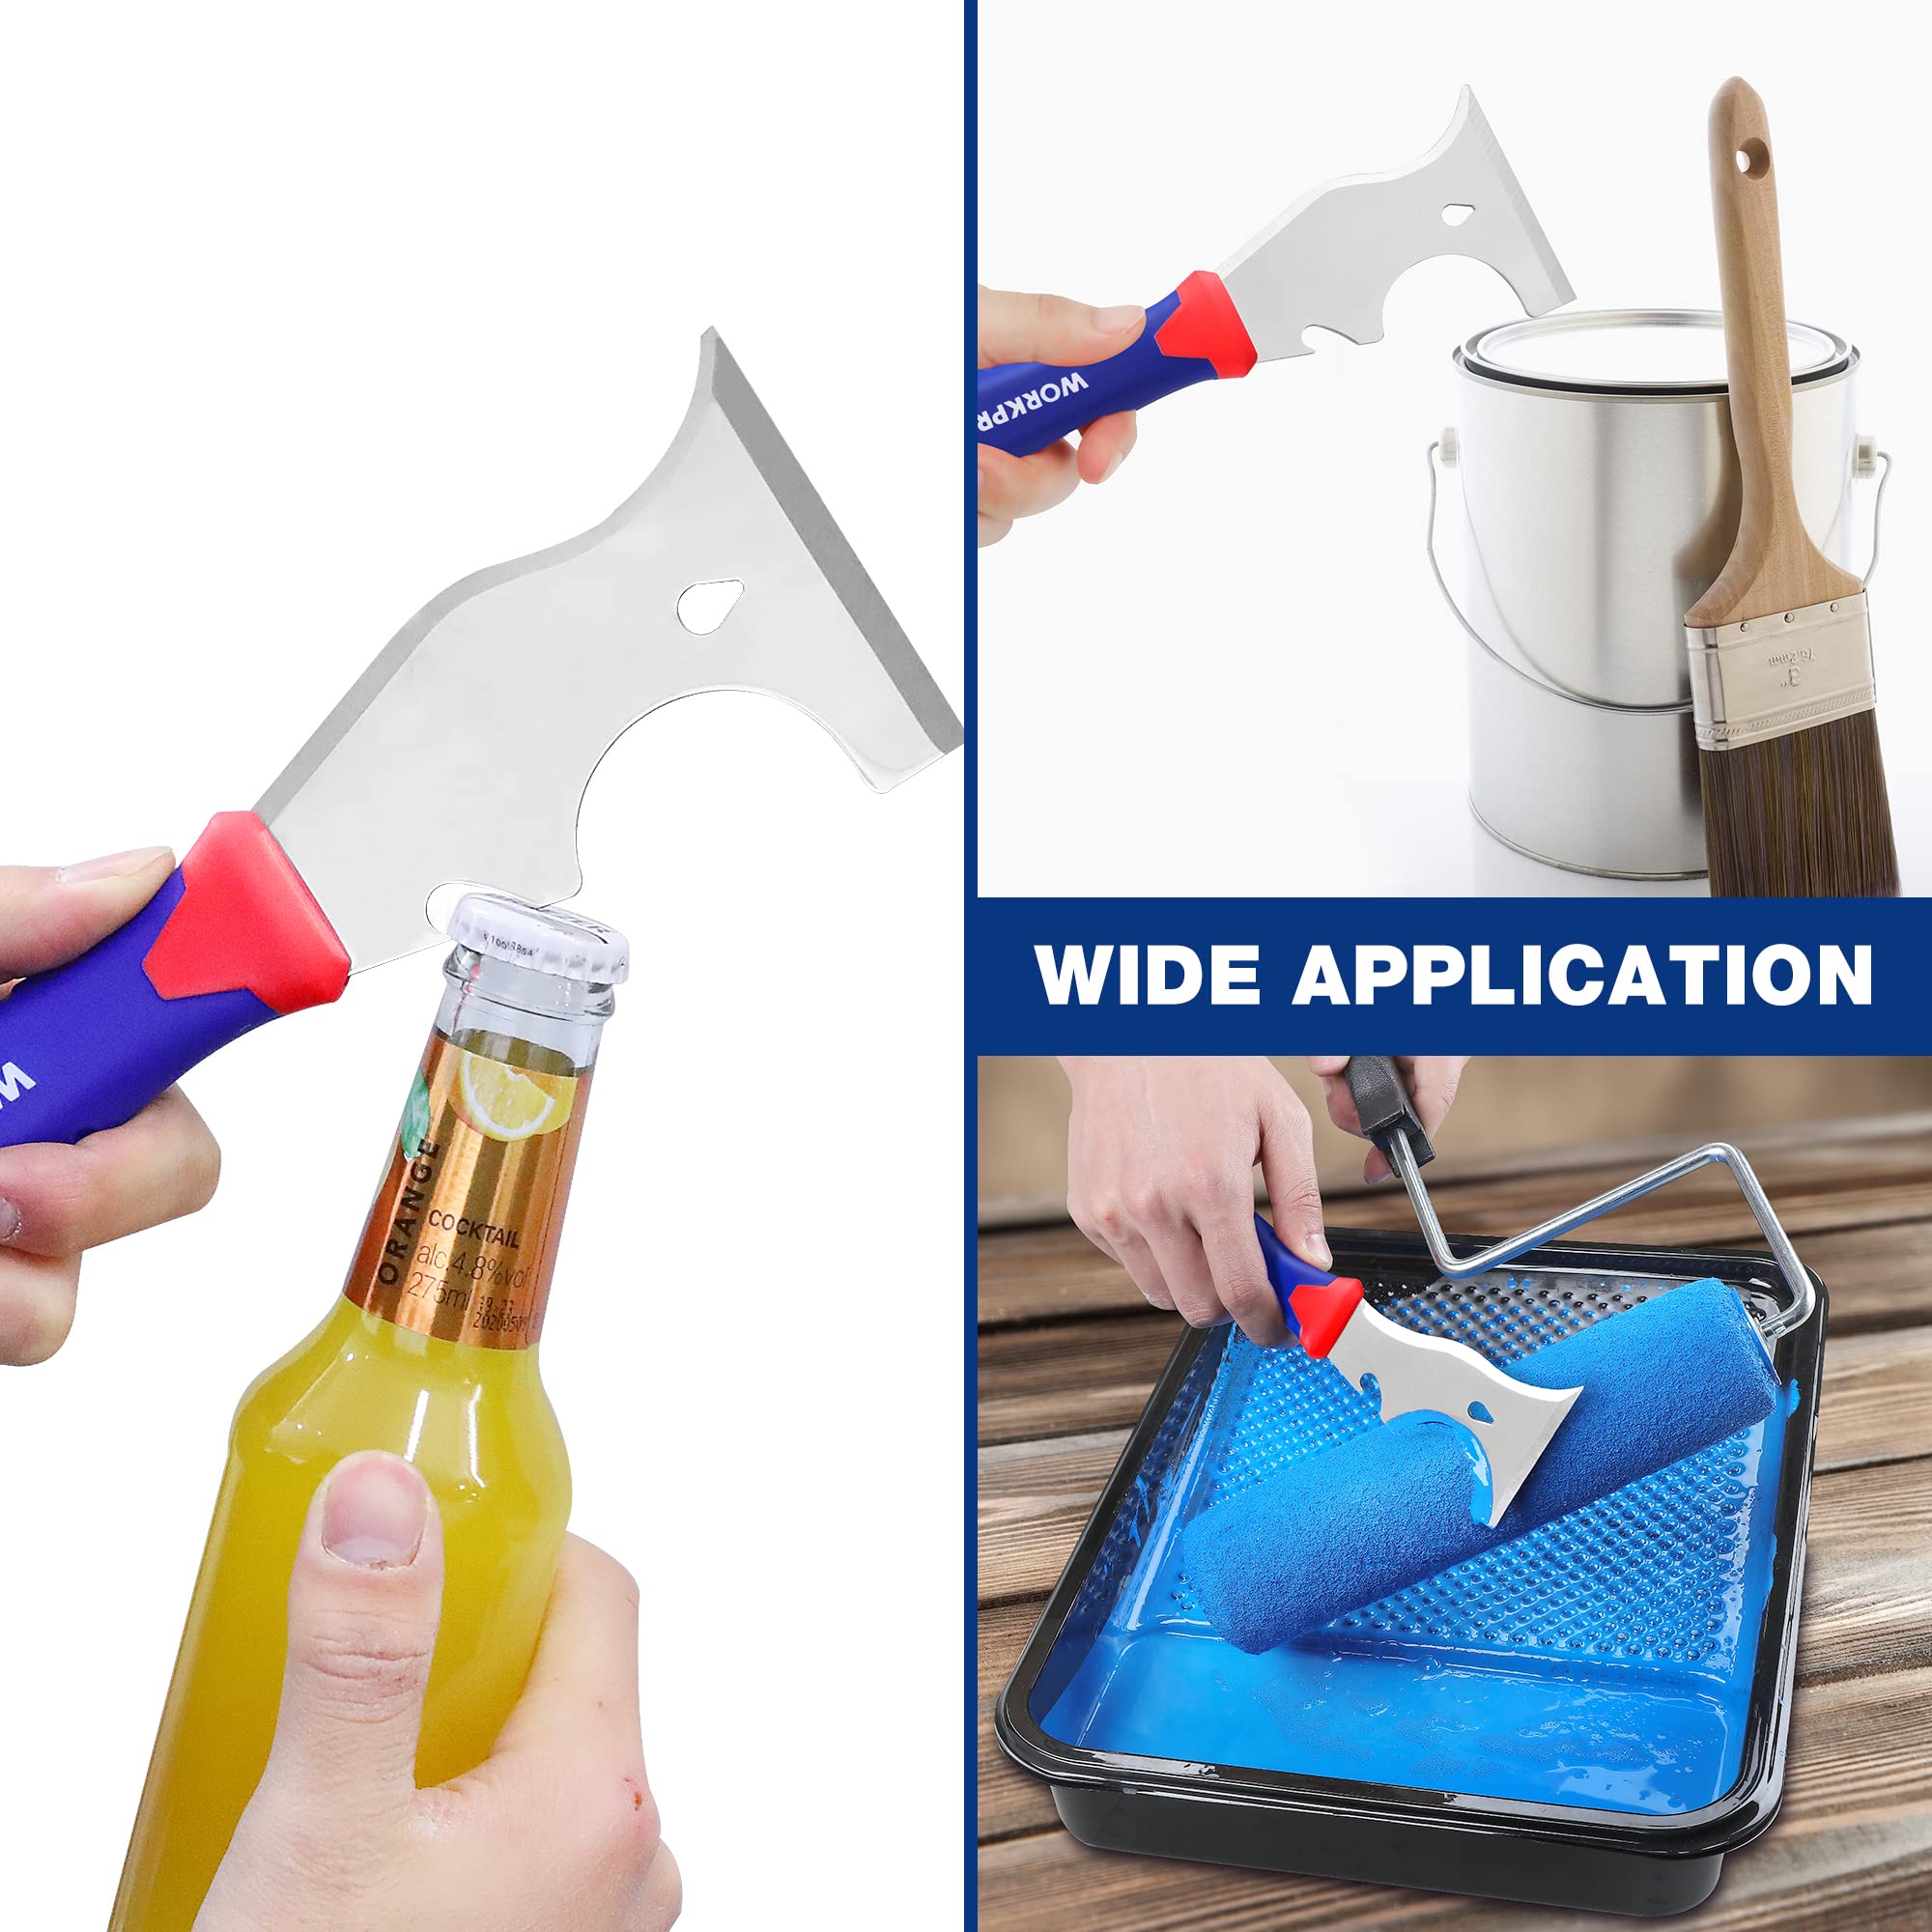 WORKPRO Paint Scraper, 8 in 1 Paint Remover, Metal Putty Knife with Hammer End and Can Opener, Stainless Steel Scraper Tool for Removing Caulk, Painting, Wood and Wallpaper